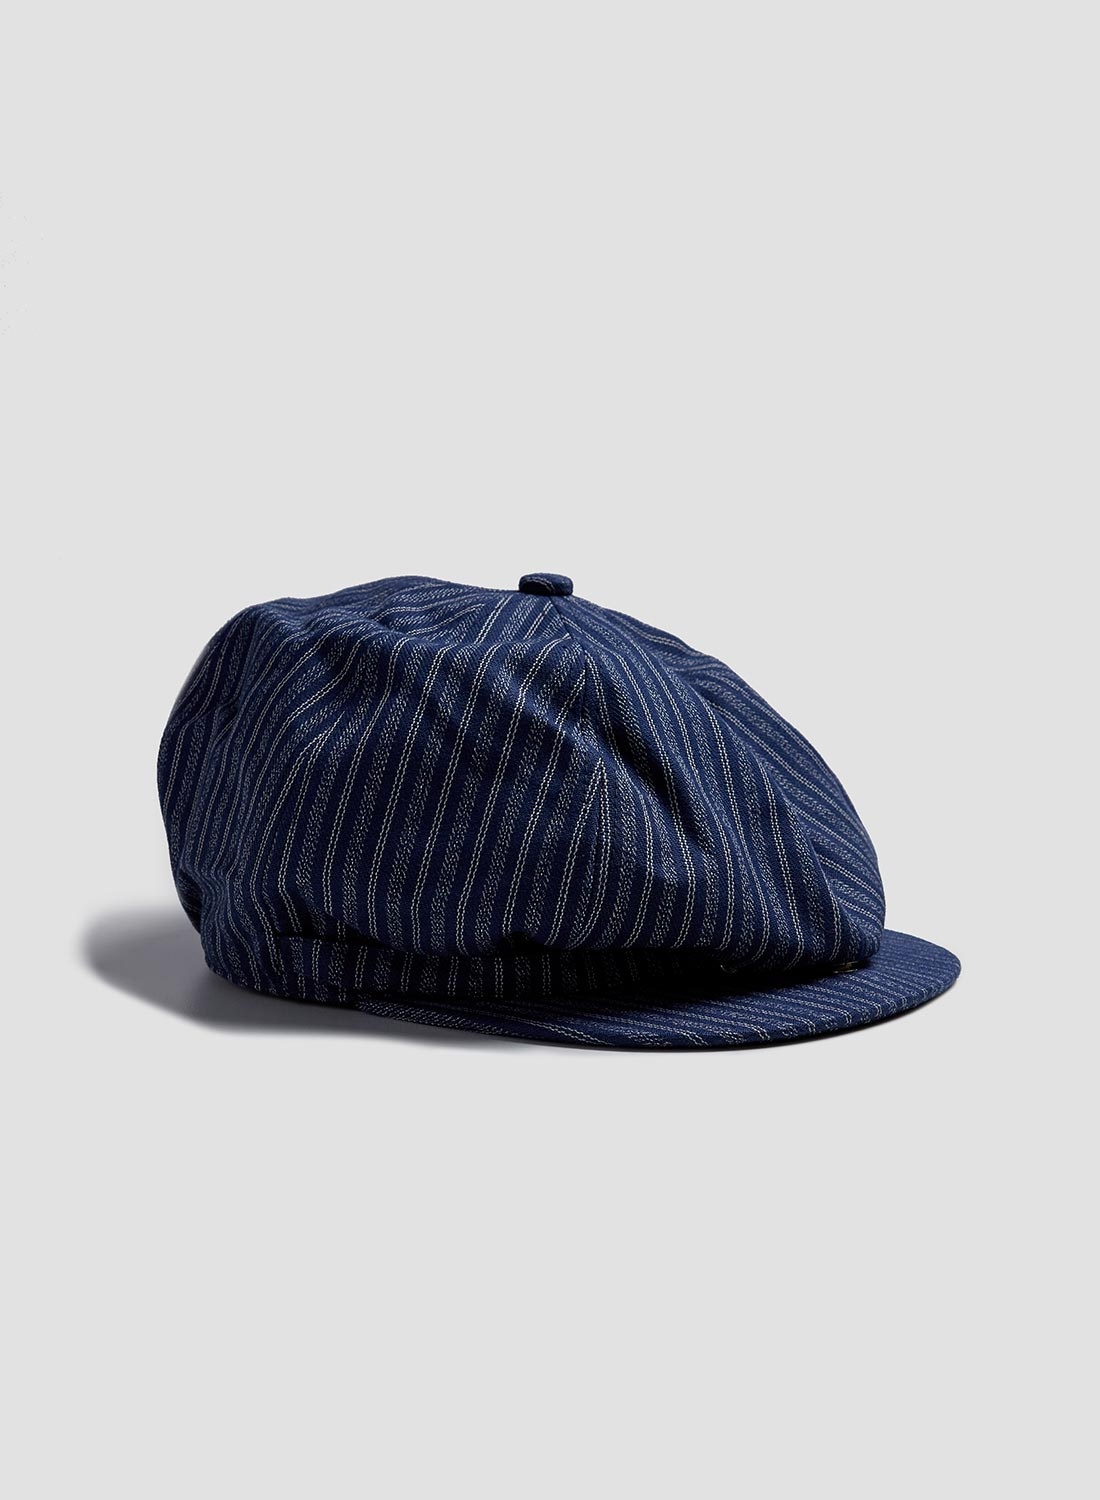 Adjustable Costume 20's Style Casquette Navy - 1